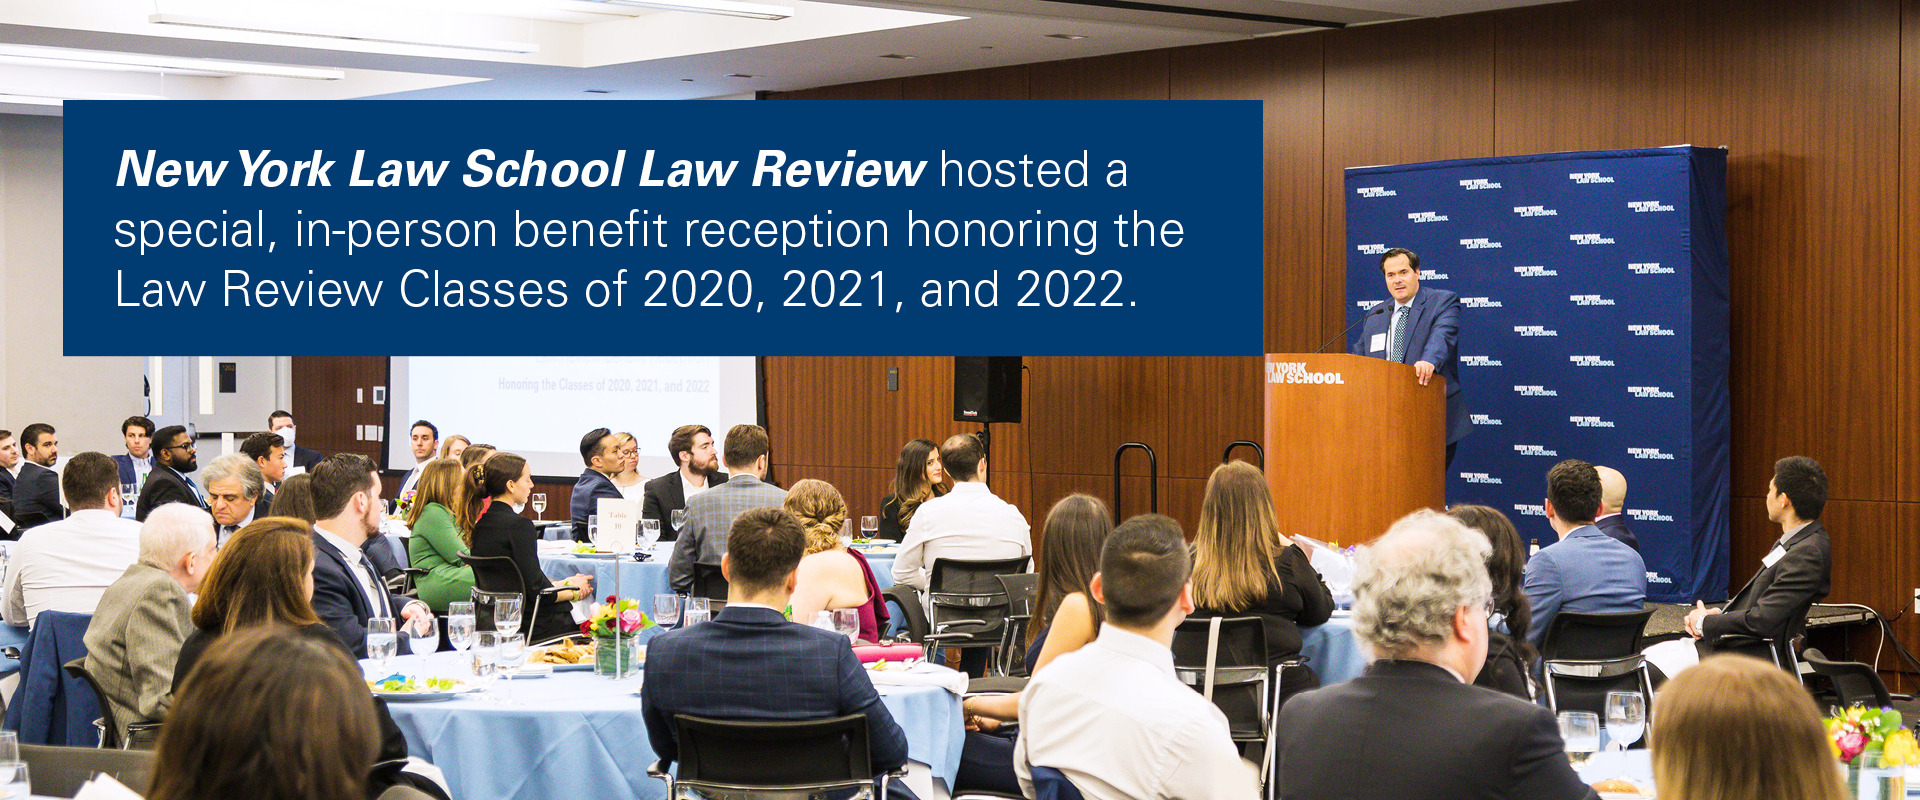 New York Law School Law Review hosted a special, in-person benefit reception honoring the Law Review Classes of 2020, 2021, and 2022.